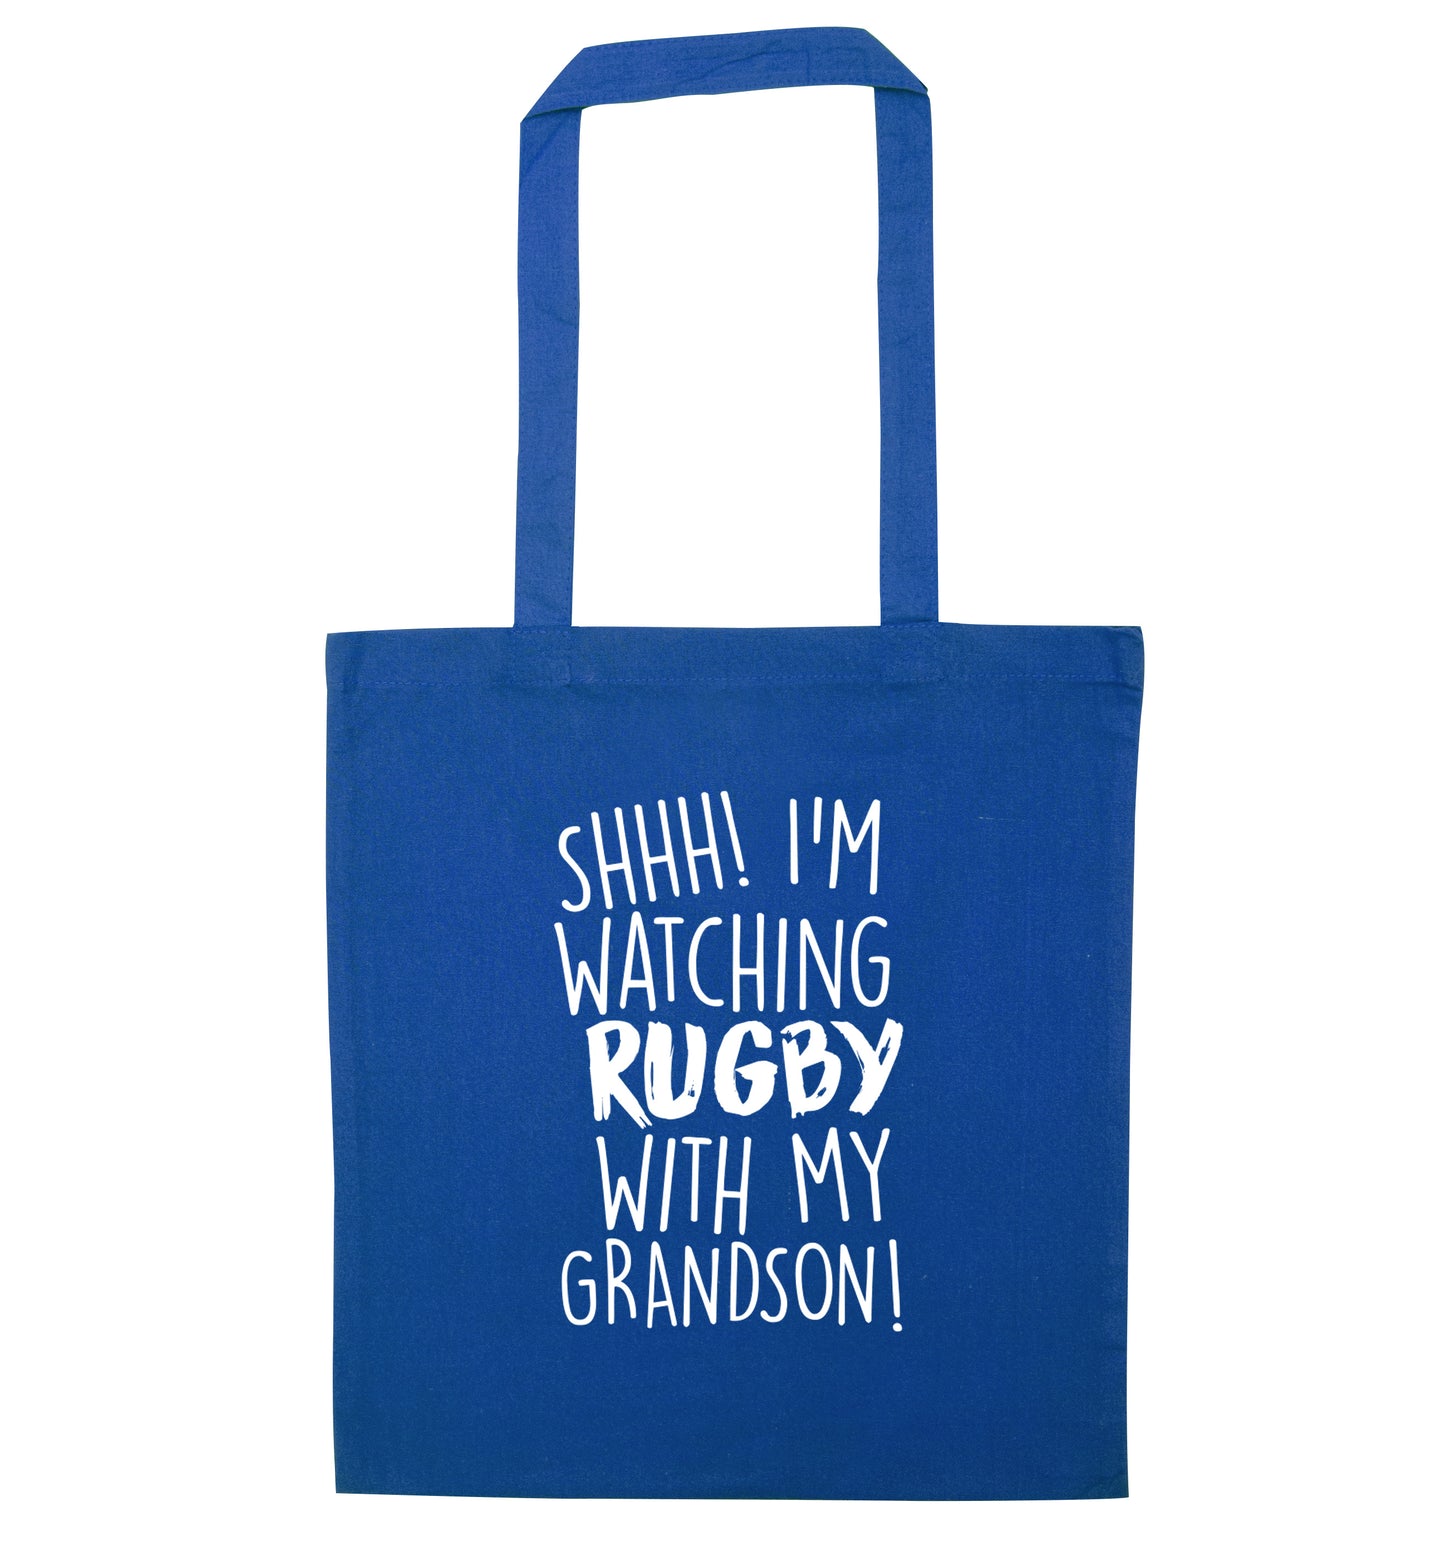 Shh I'm watching rugby with my grandson blue tote bag